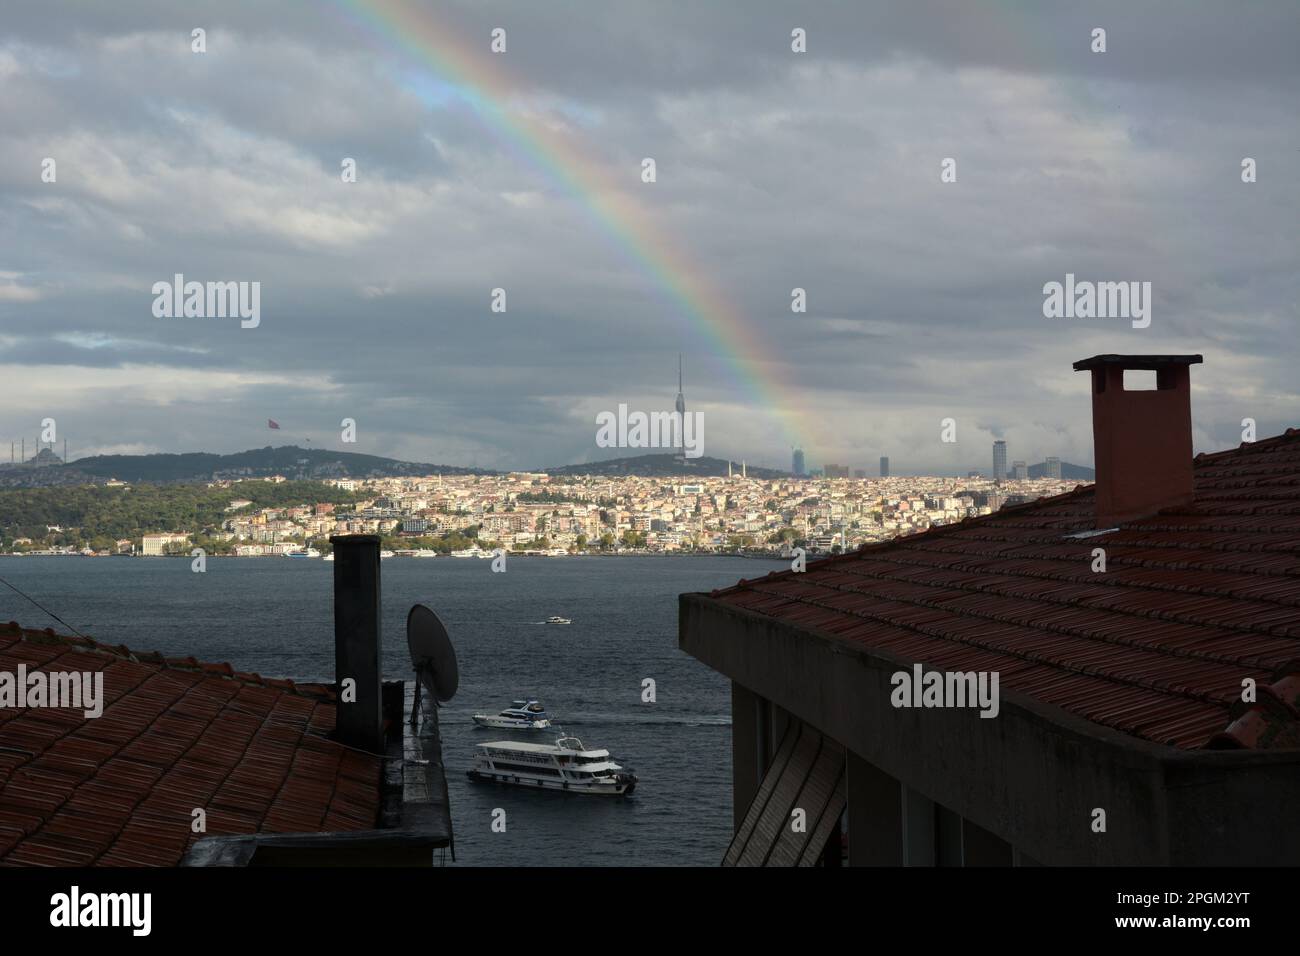 Looking at a rainbow across the Strait of Bosphorus from Cihangir, Beyoglu on the European side to Uskudar on the Asian side of Istanbul, Turkey. Stock Photo